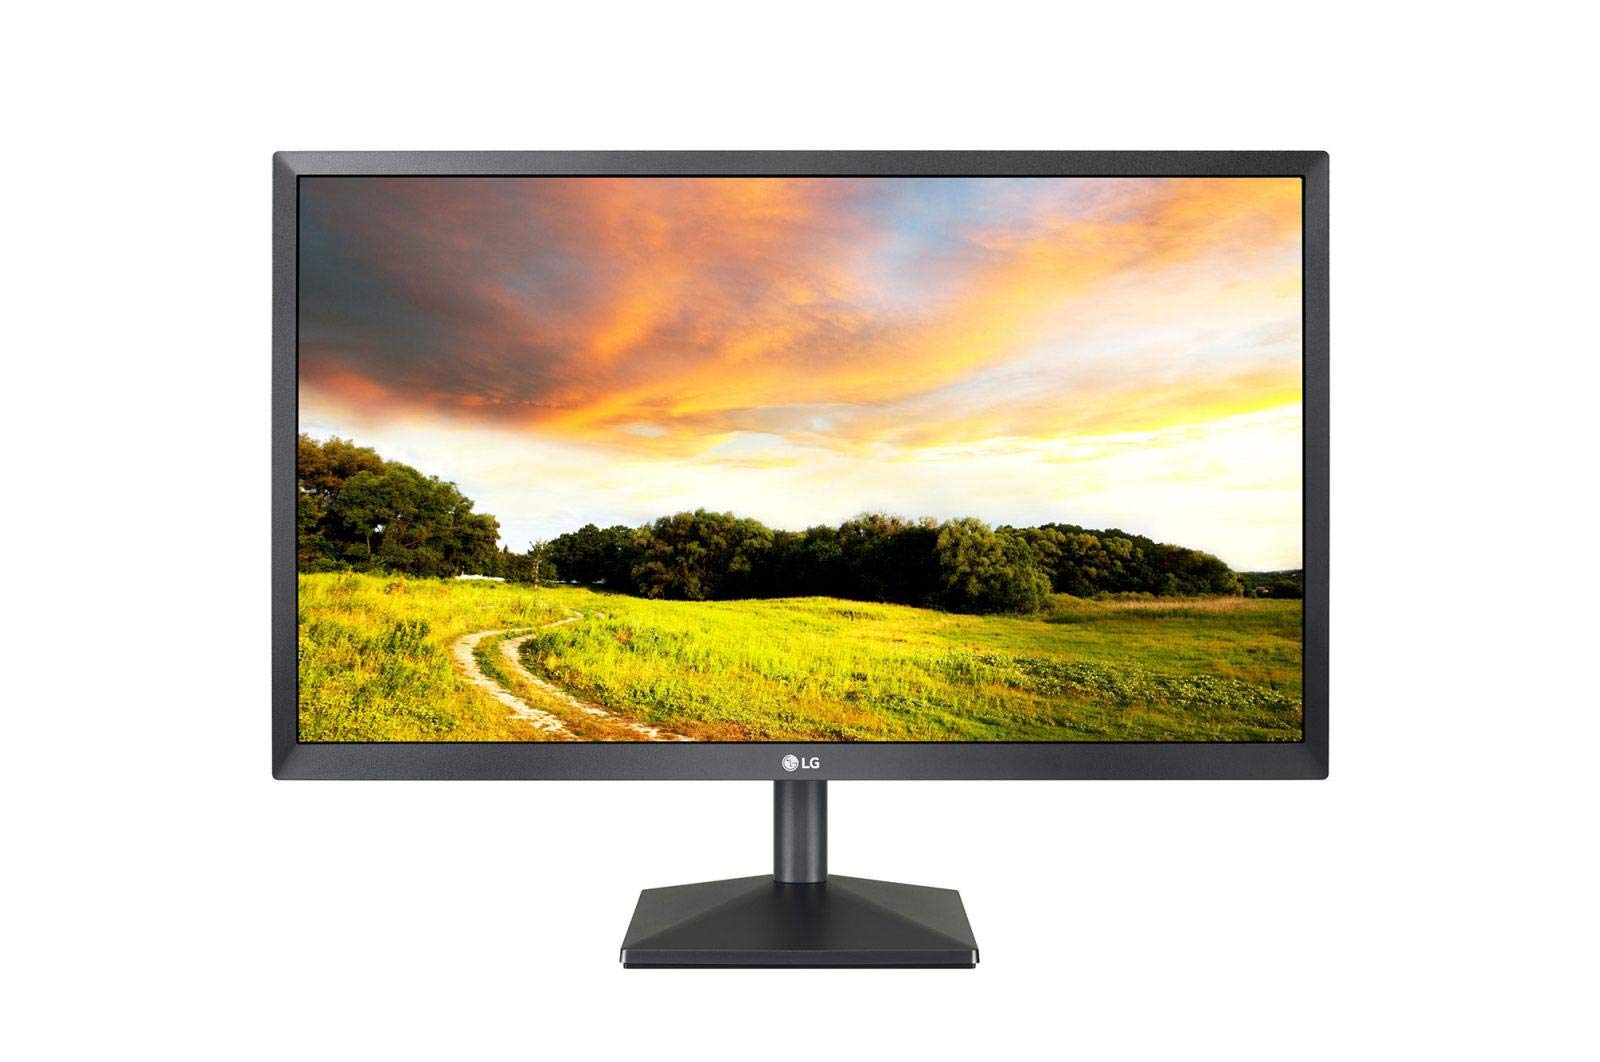 22" Wide format monitor TV